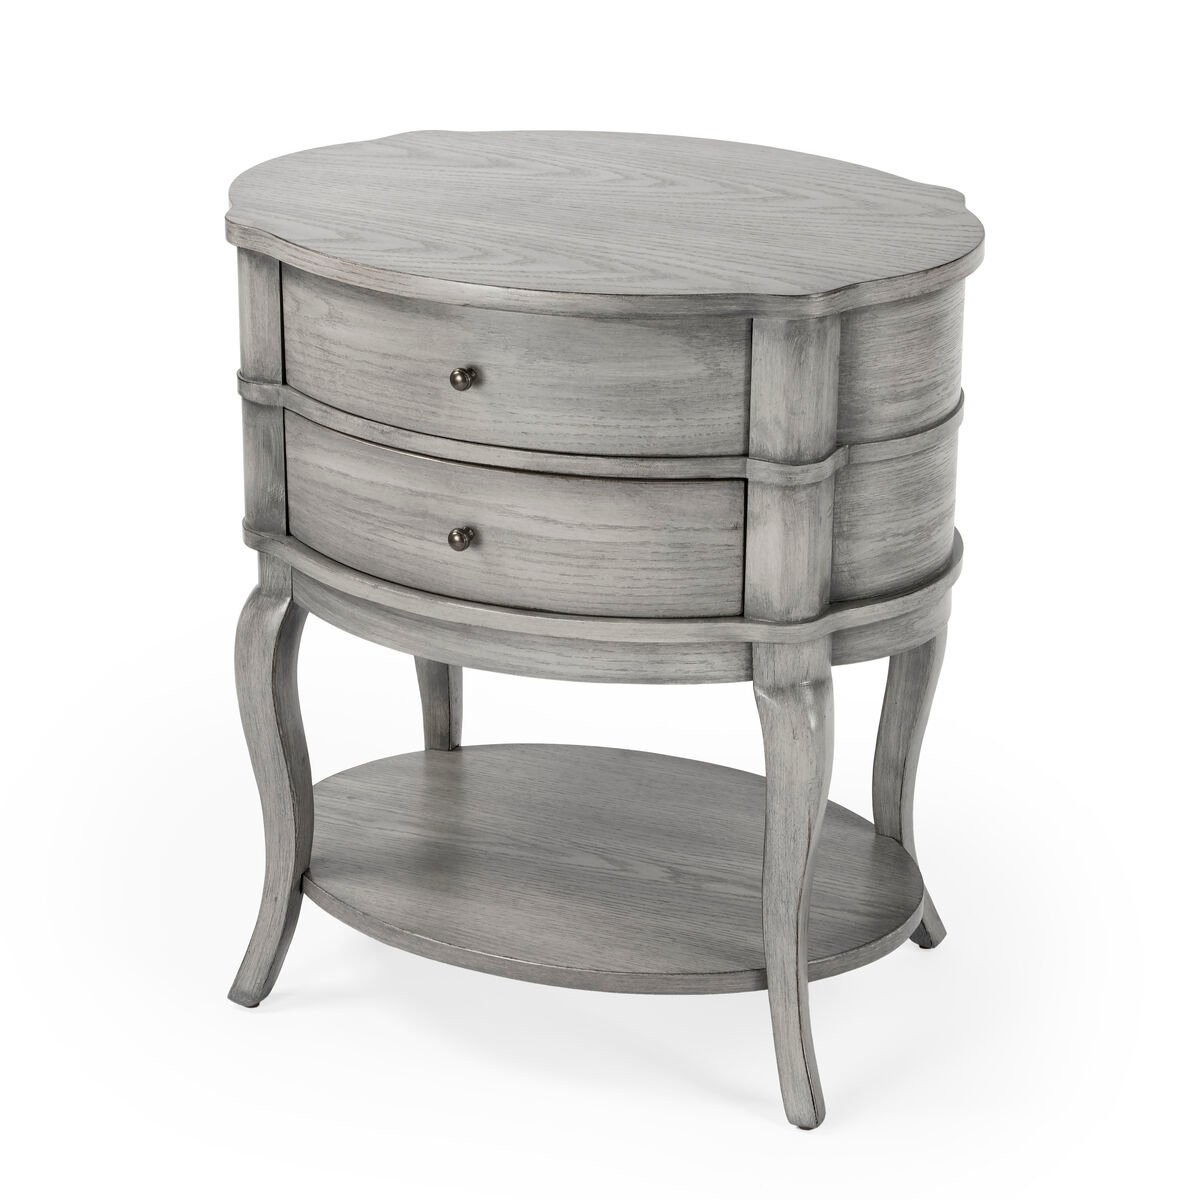 Butler Specialty Company’s transitional side table